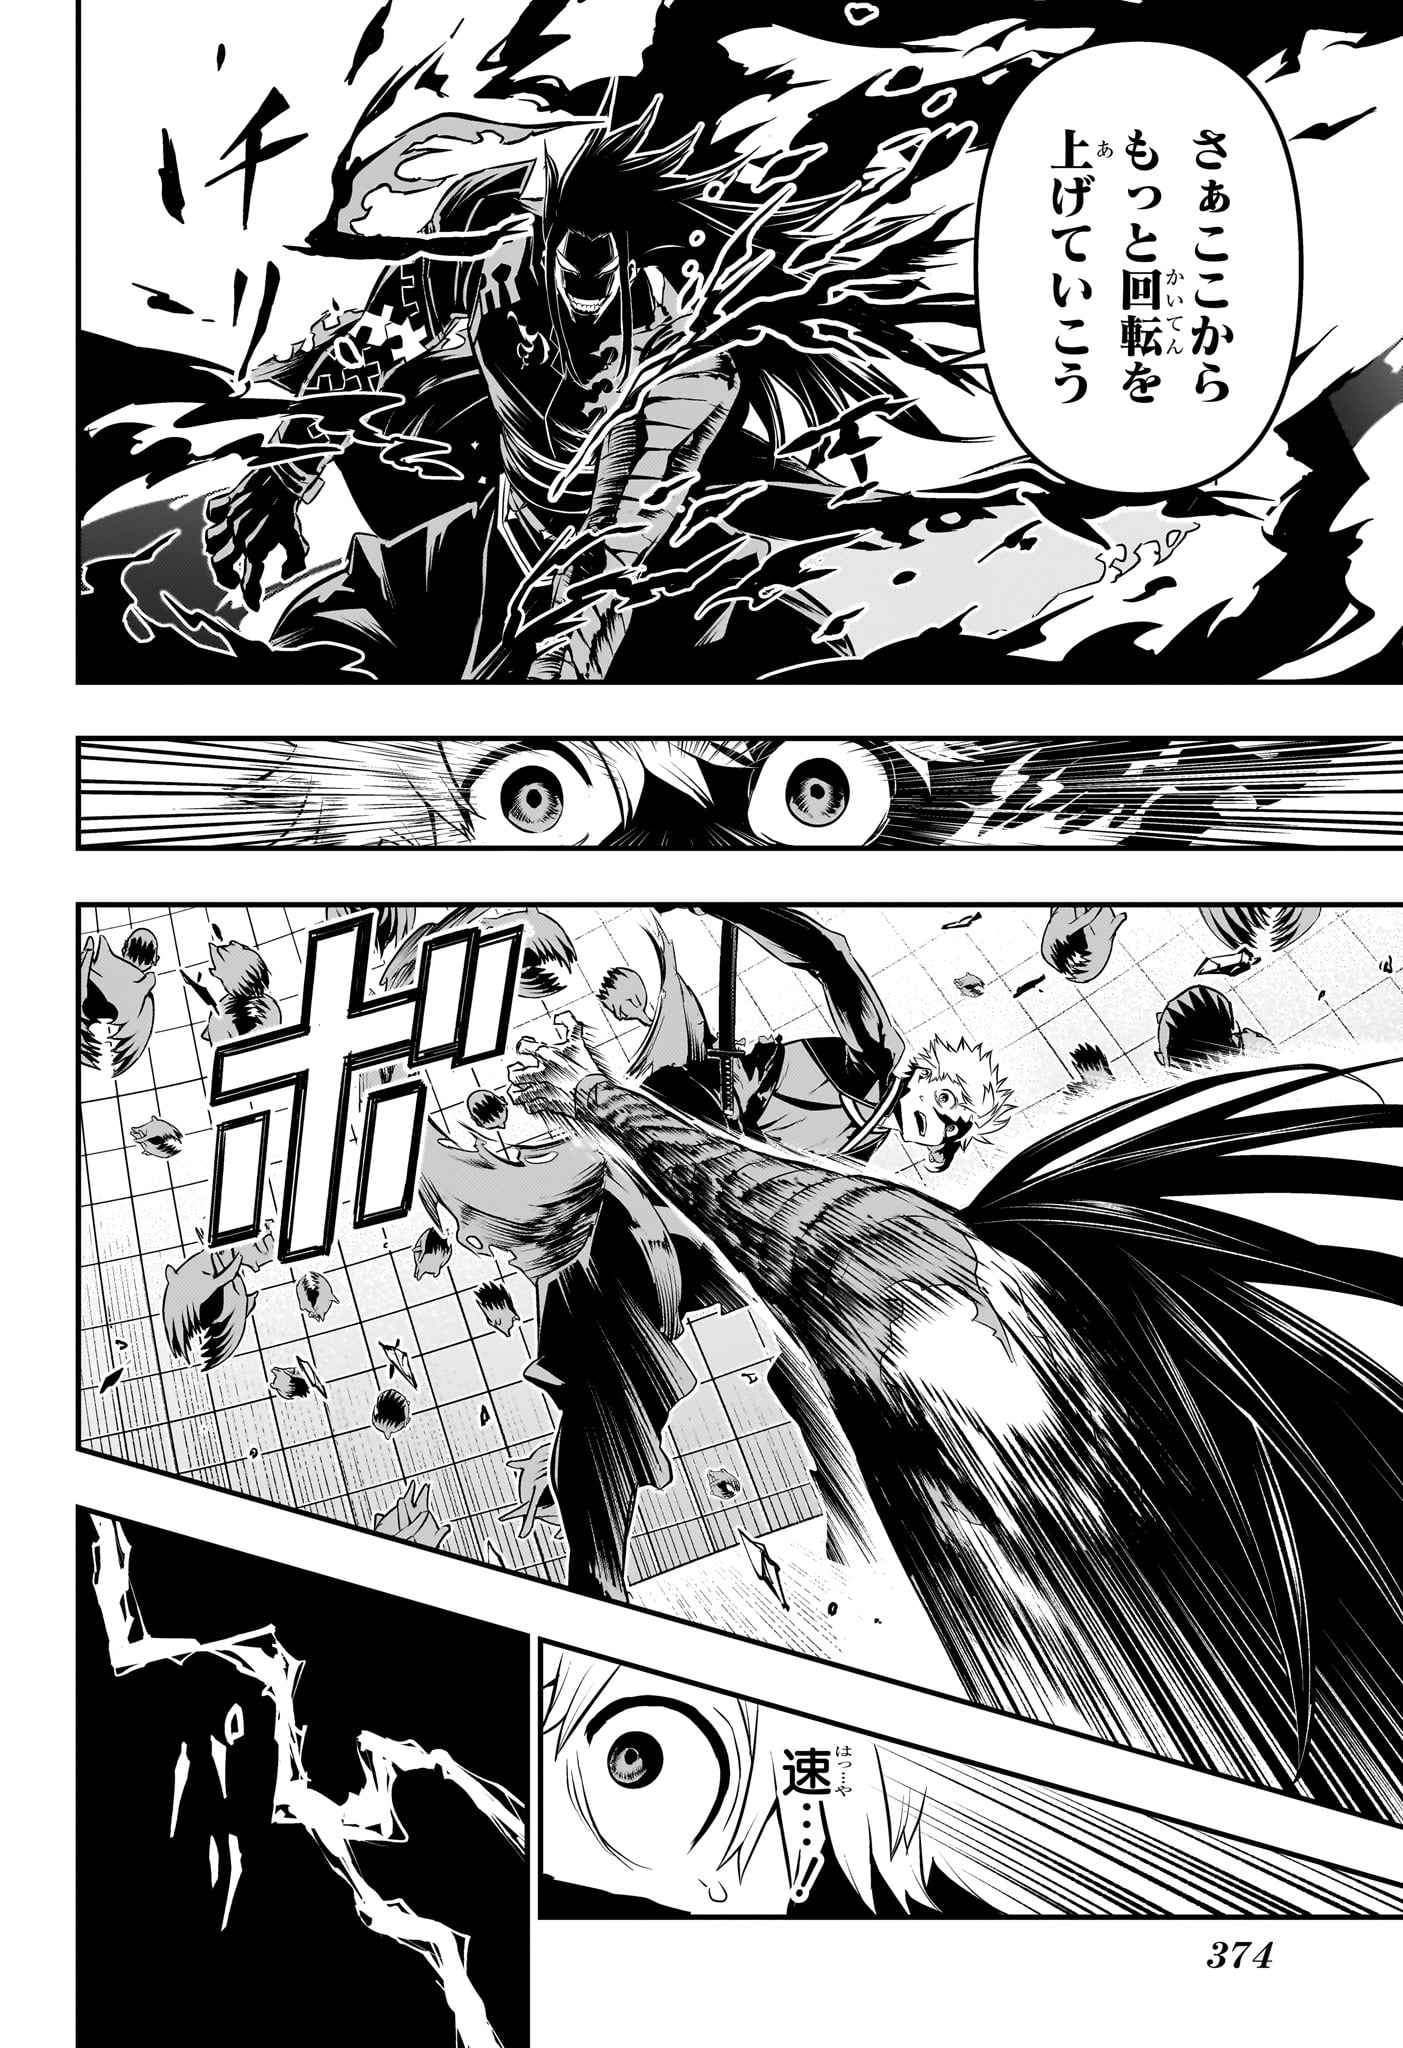 Nue no Onmyouji - Chapter 55 - Page 10